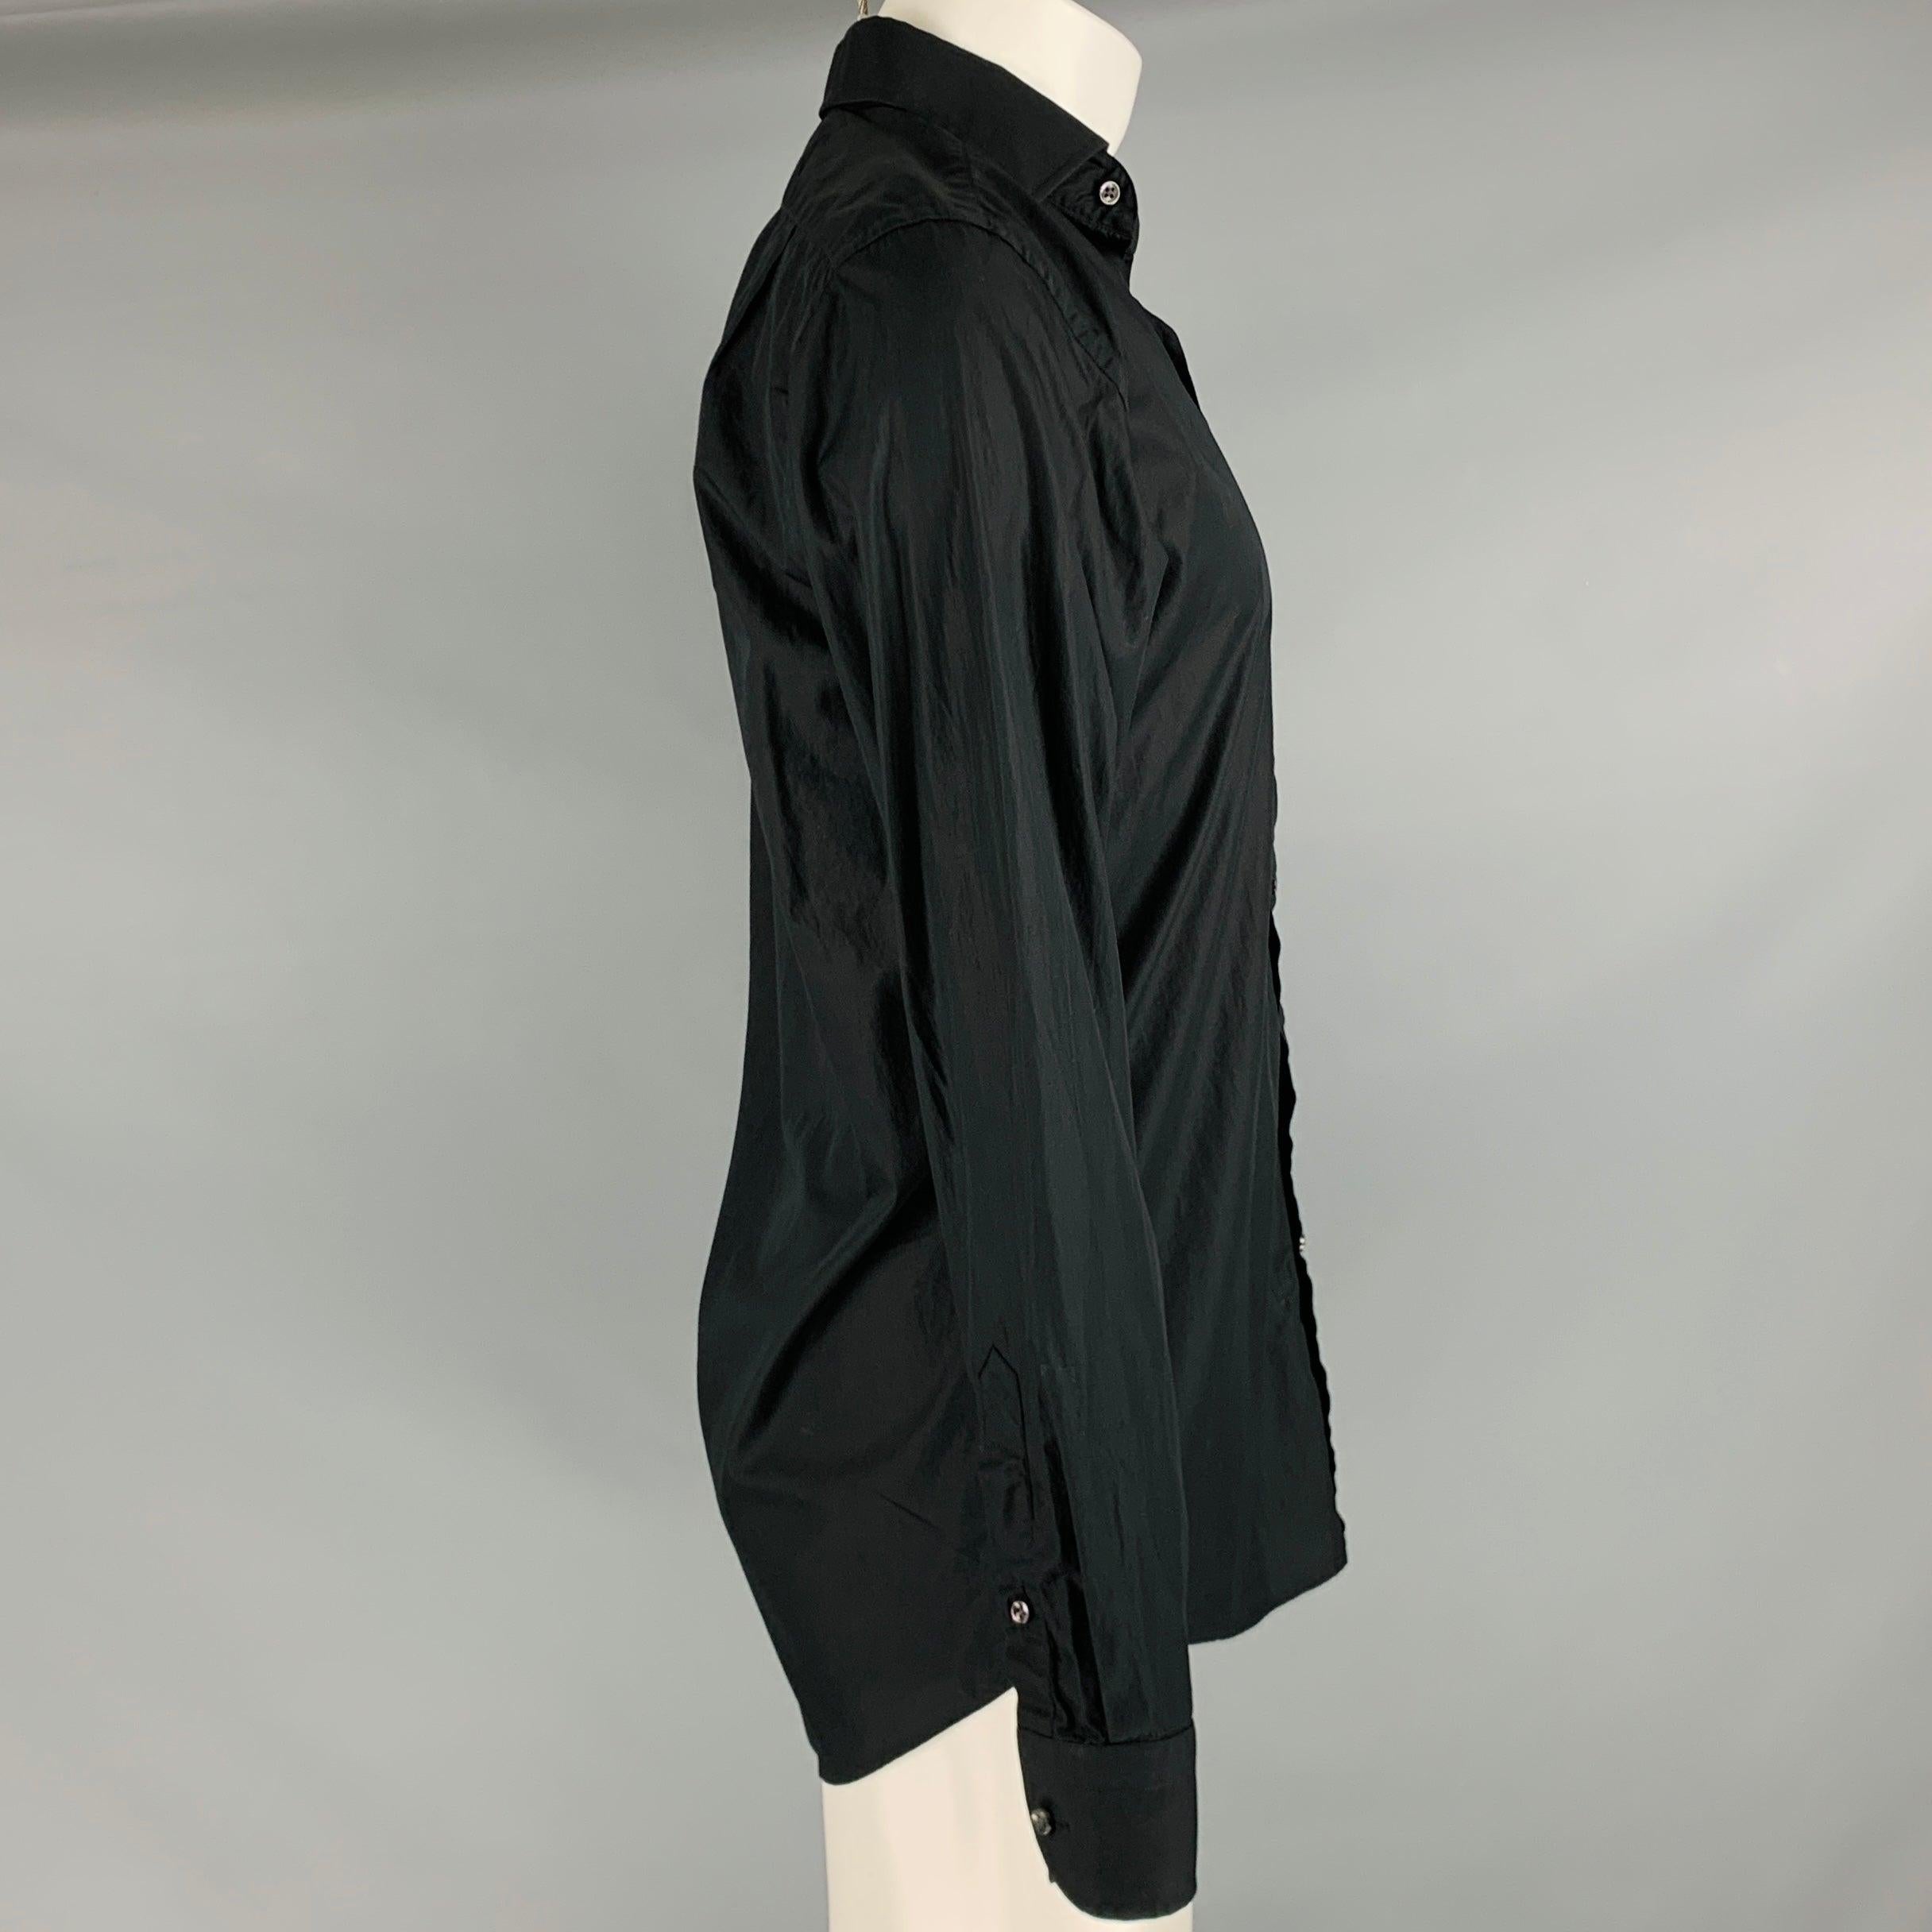 RALPH LAUREN BLACK LABEL long sleeve shirt
in a black cotton fabric featuring cutaway collar and button closure. Made in Italy.Excellent Pre-Owned Condition. 

Marked:   15 

Measurements: 
 
Shoulder: 16.5 inches Chest: 41 inches Sleeve: 25 inches